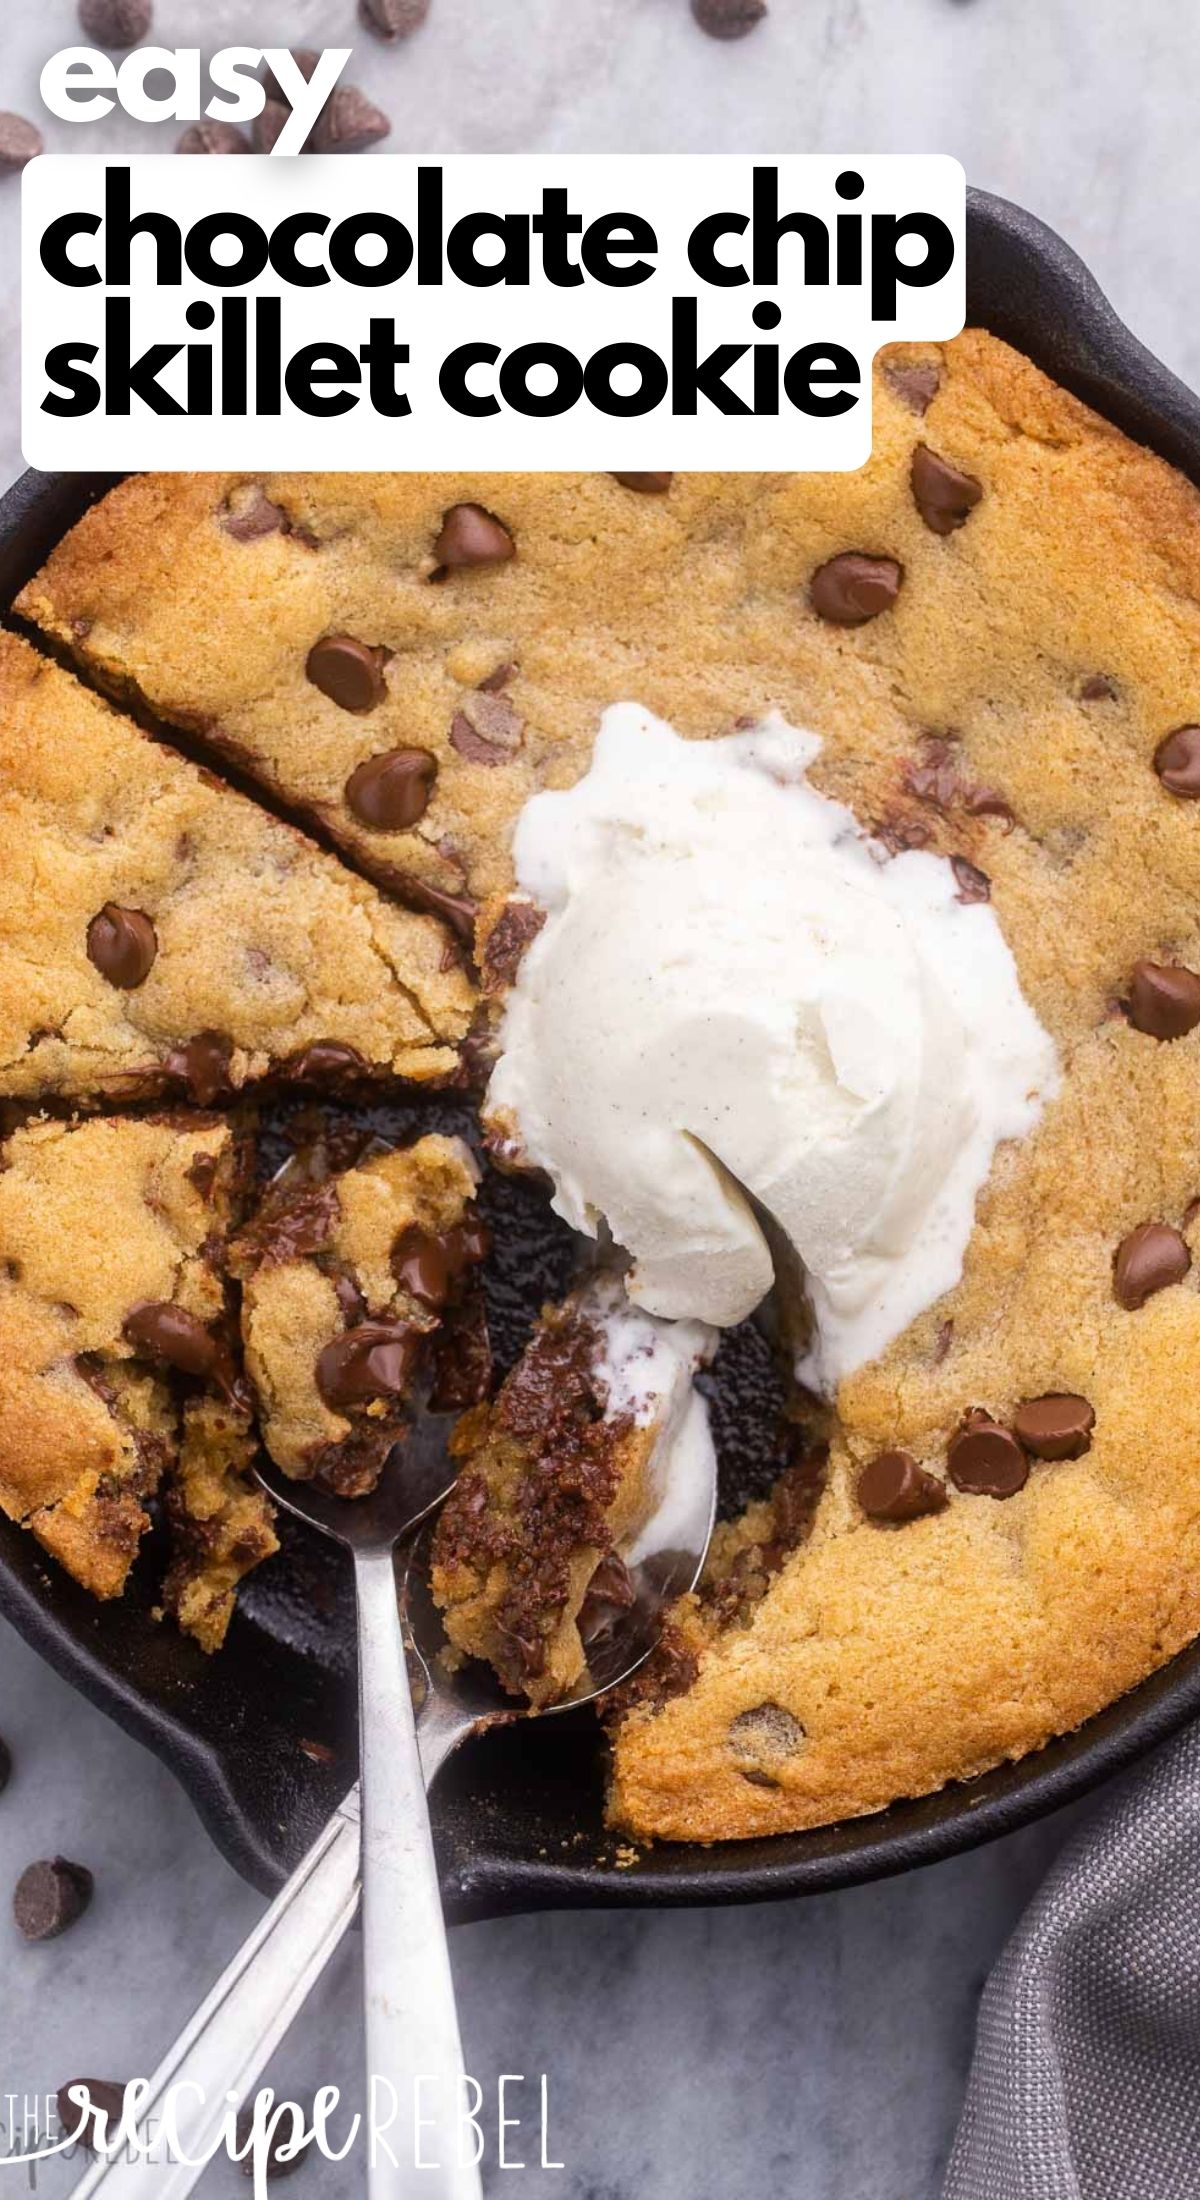 https://www.thereciperebel.com/wp-content/uploads/2023/04/chocolate-chip-skillet-cookie-TRR-pin.jpg